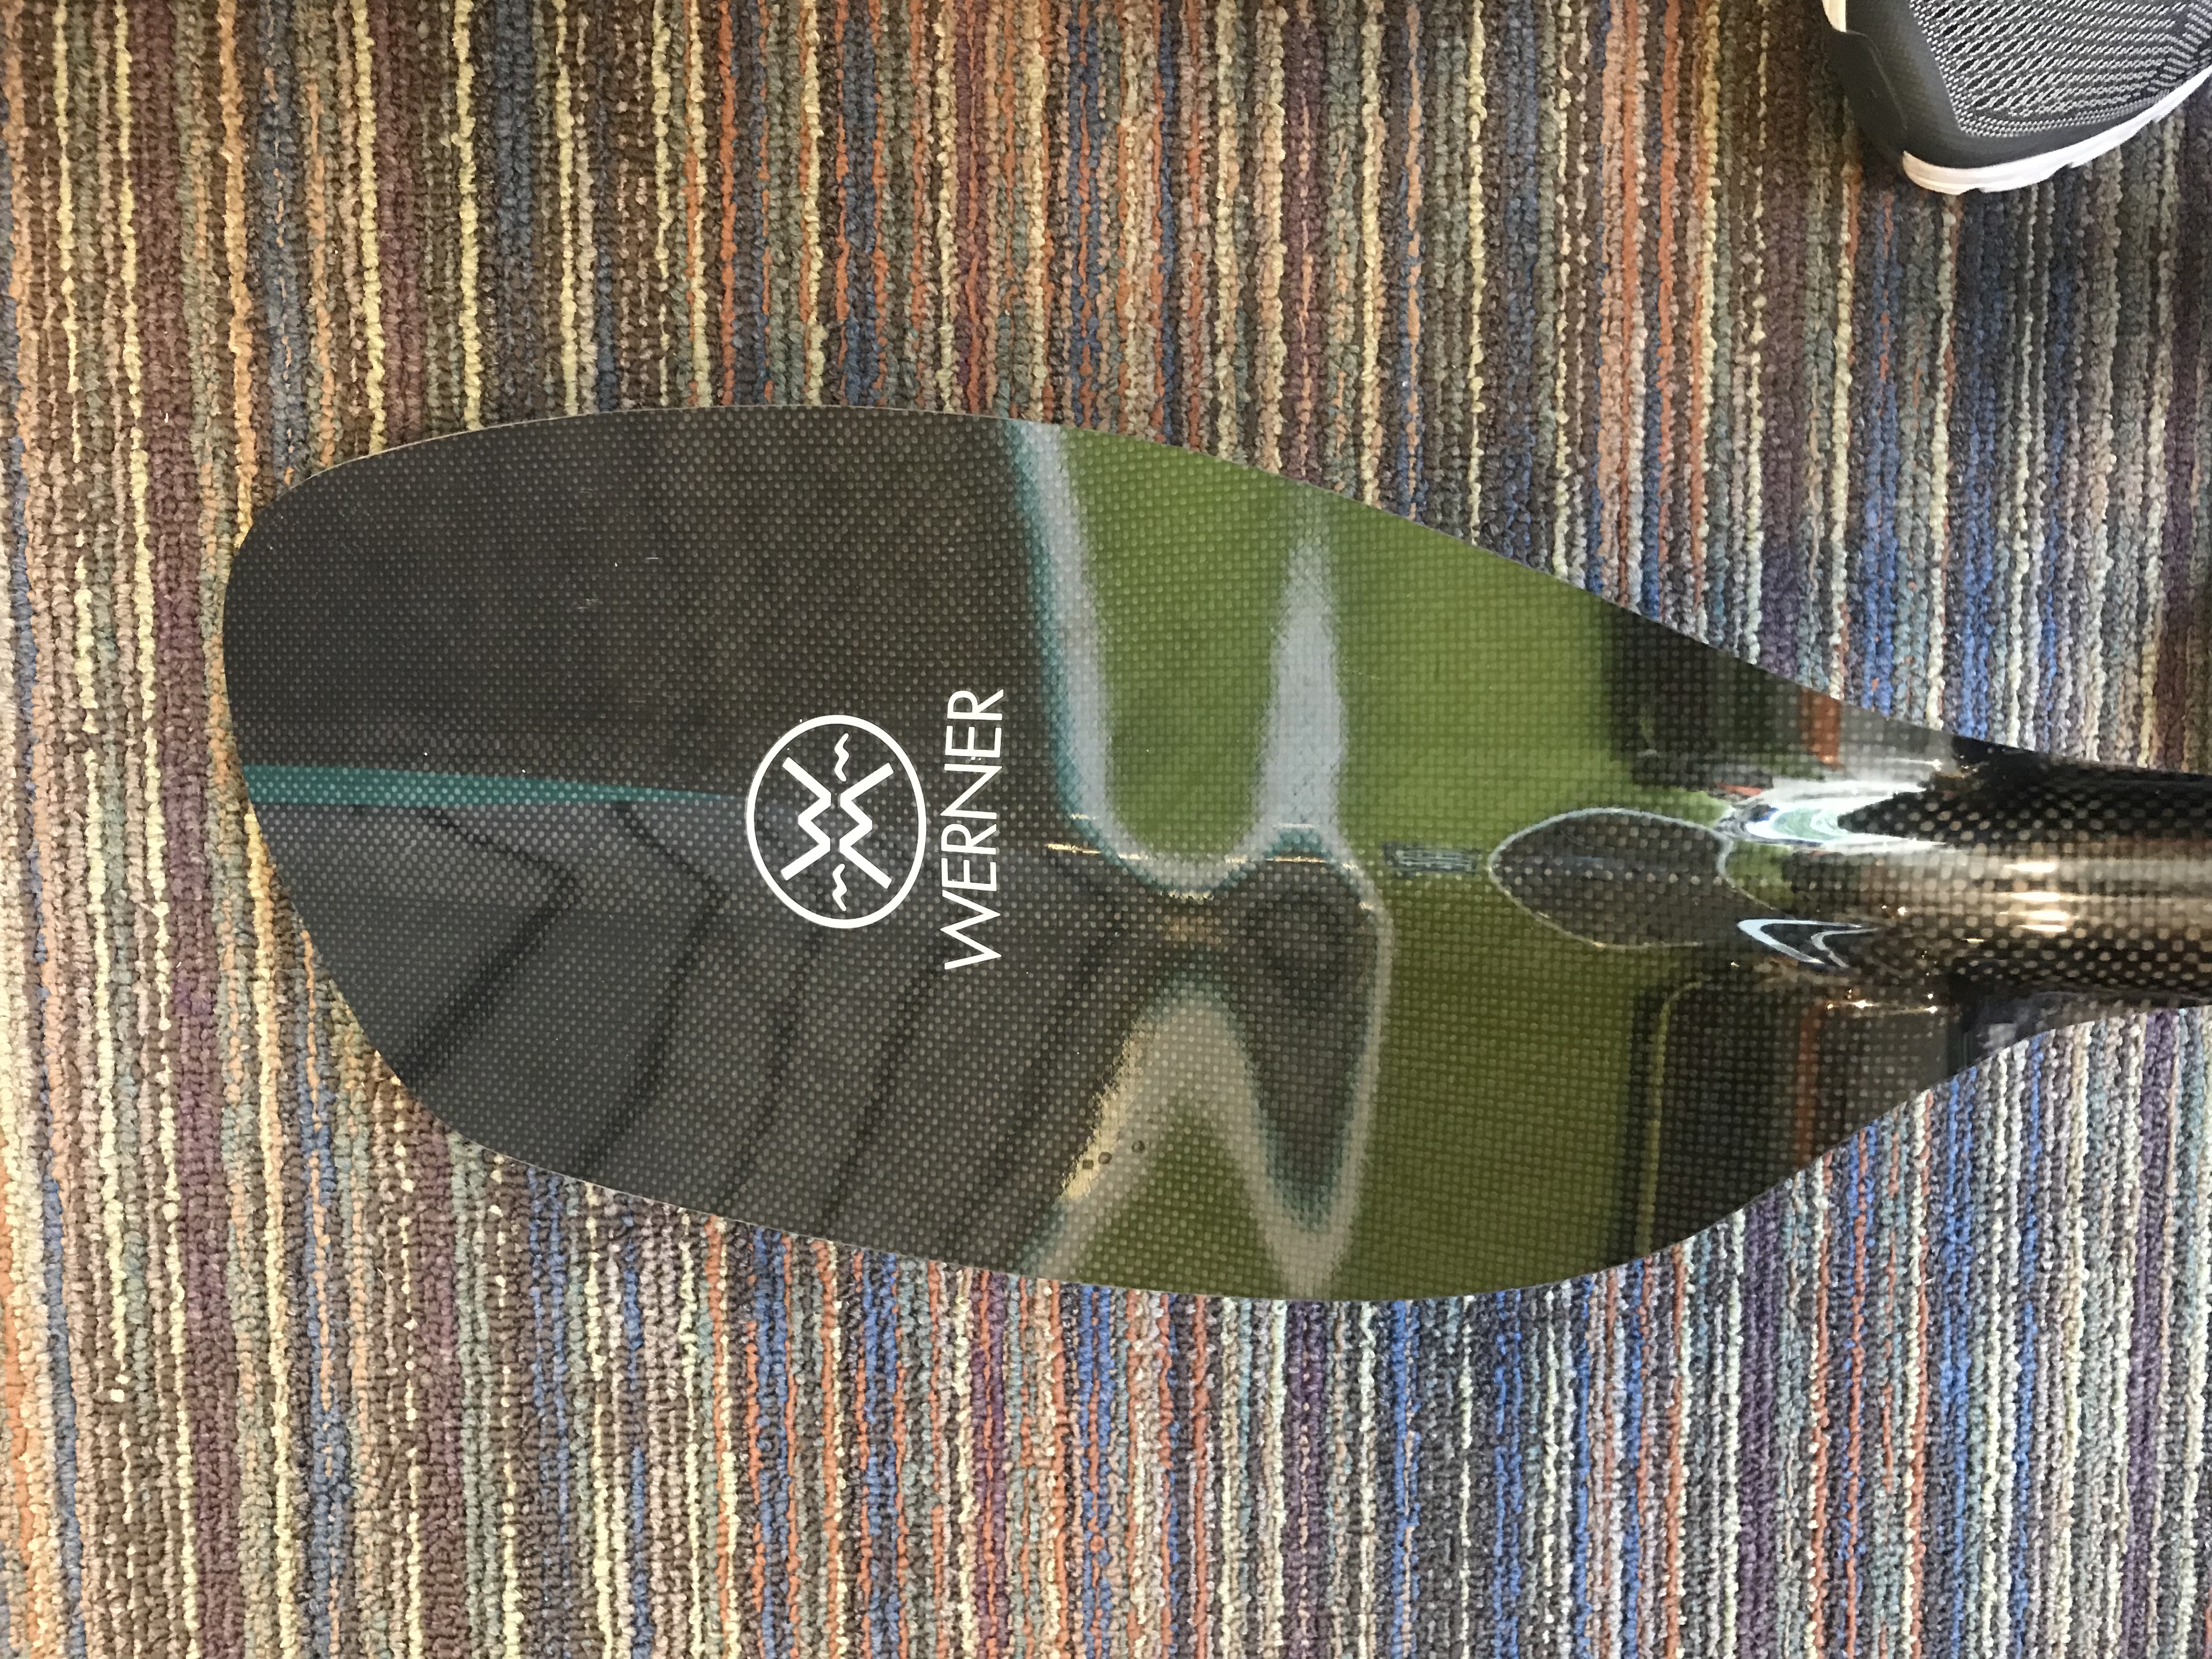 Does The Werner Sherpa Carbon Whitewater Kayaking Paddle Have a Foam Core?